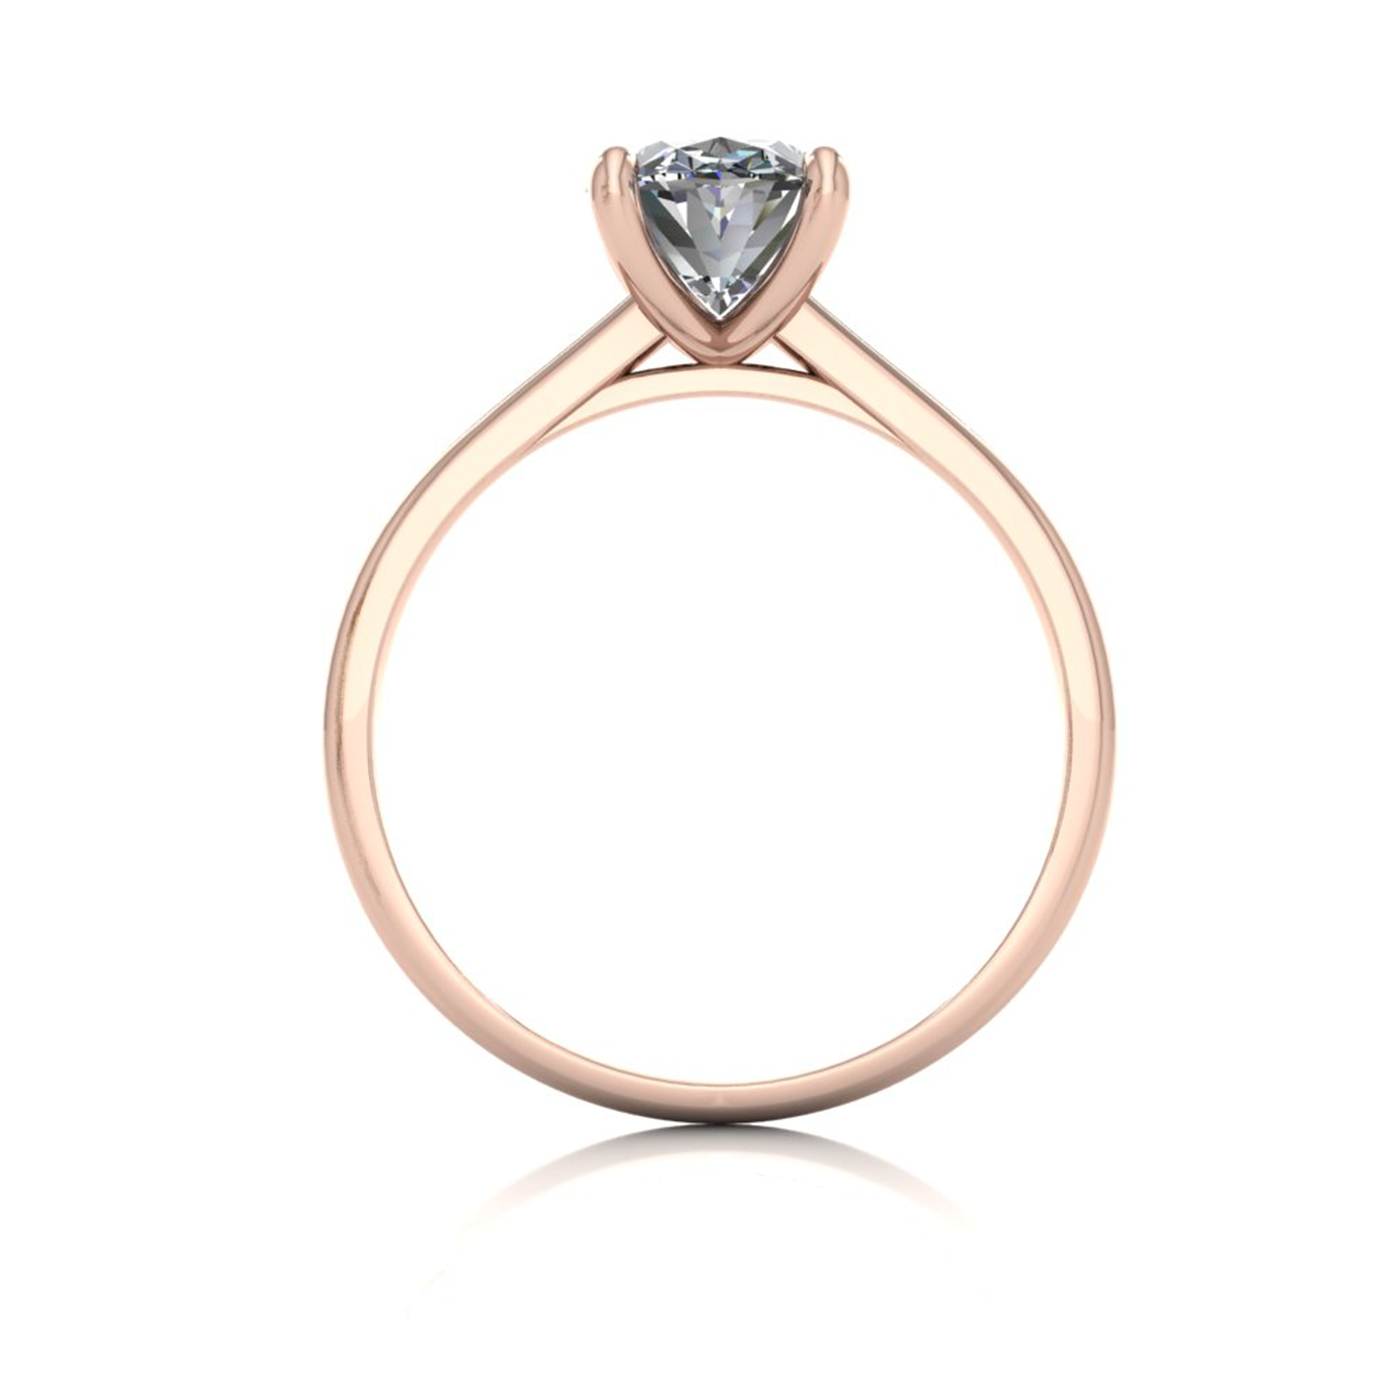 18k rose gold  1,50 ct 4 prongs solitaire oval cut diamond engagement ring with whisper thin band